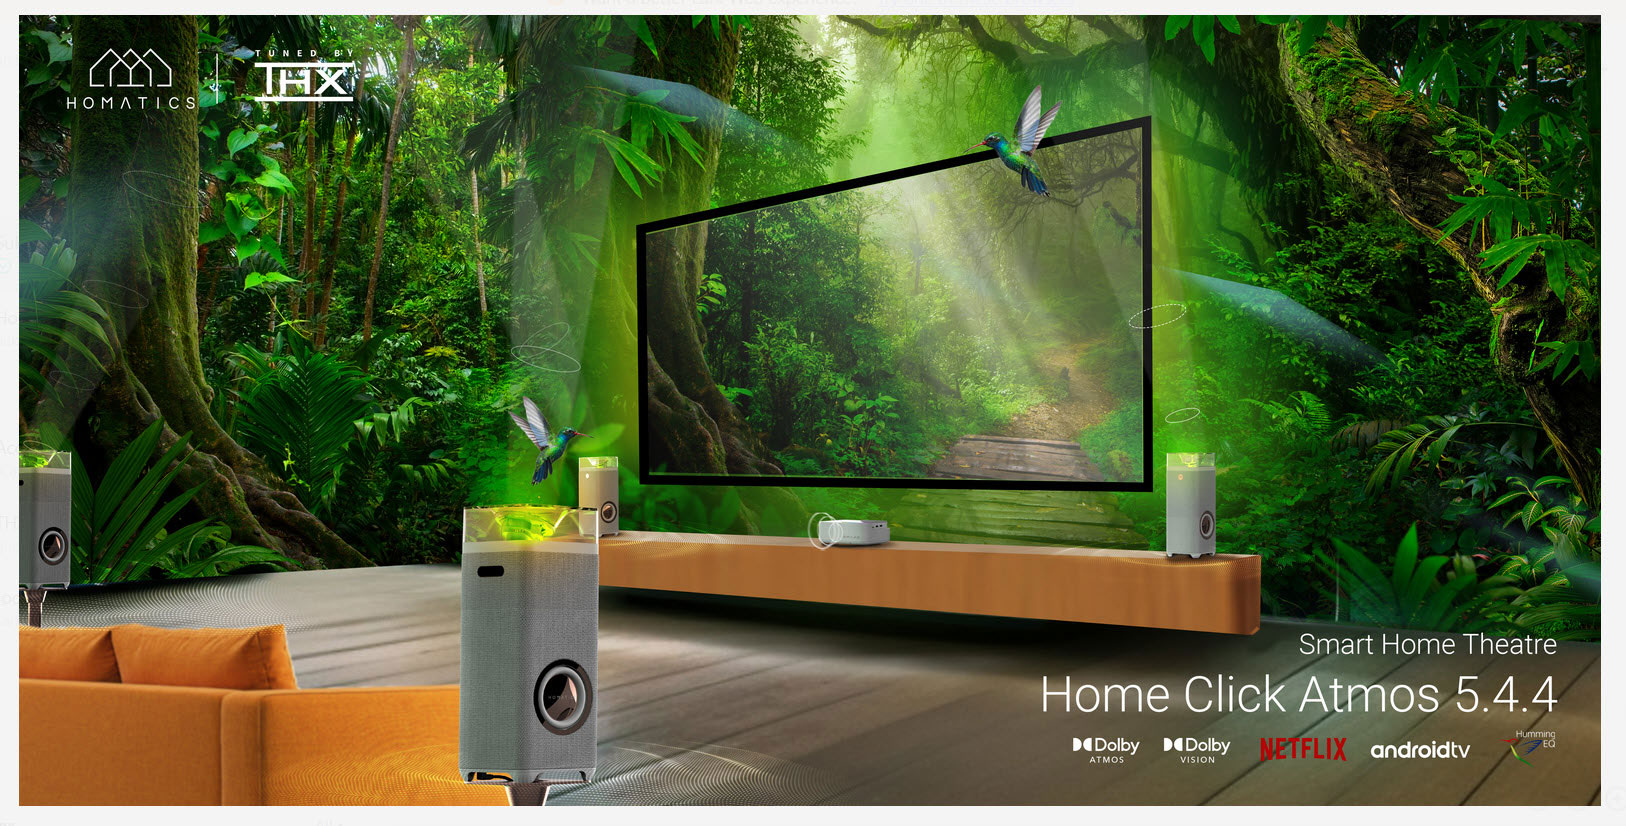 THX and Homatics to preview at NAB a Home Theater System for the Pay-TV market, a solution that brings users closer to experience intended by content creators.